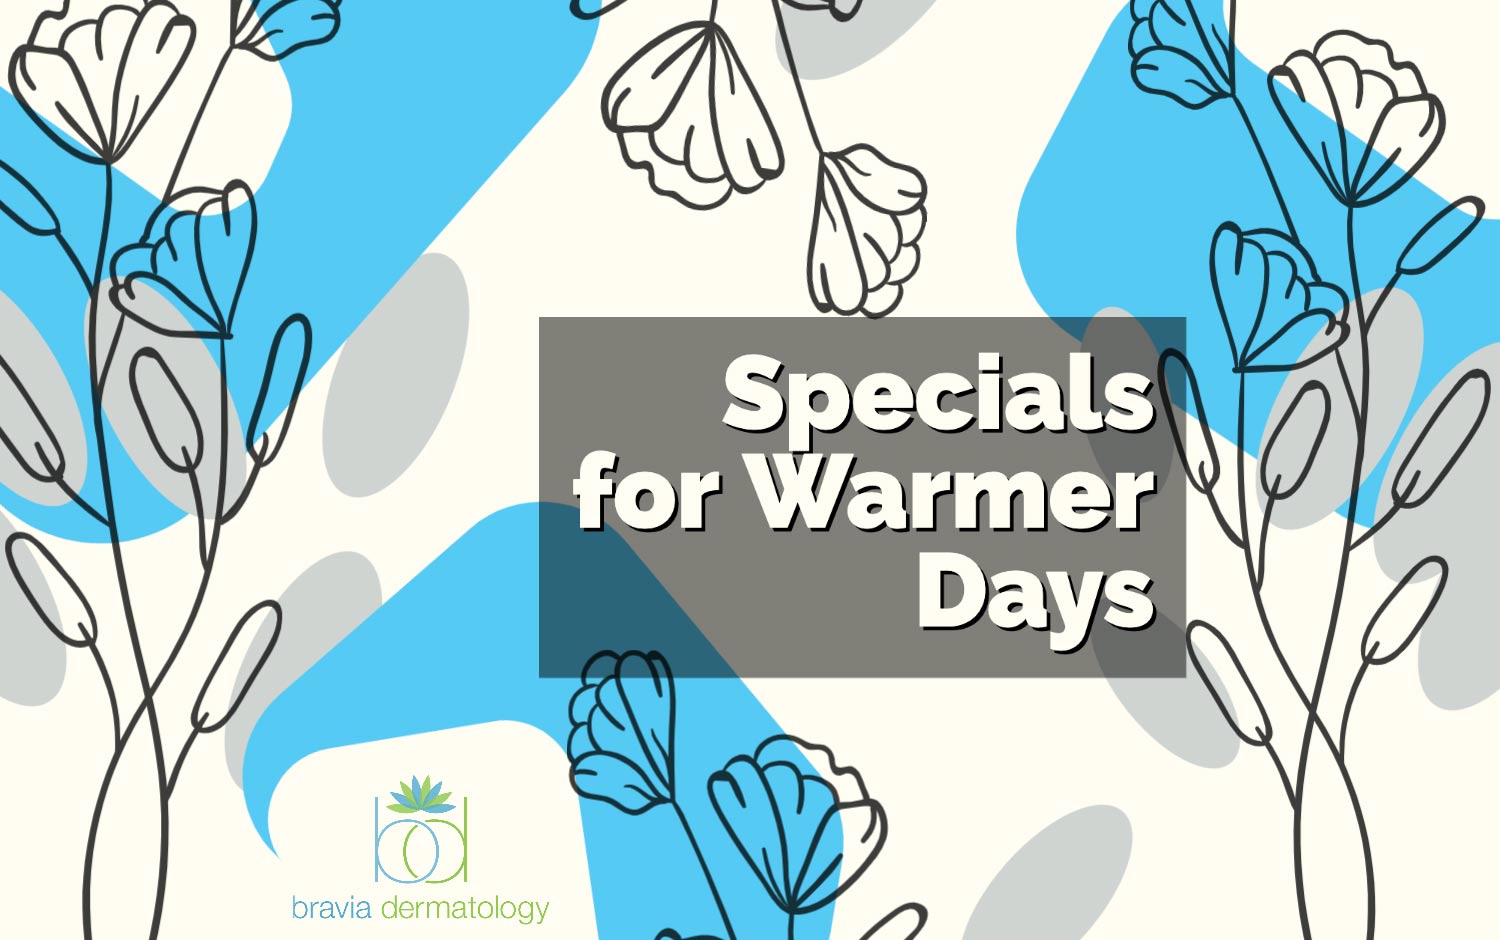 Specials for Warmer Days